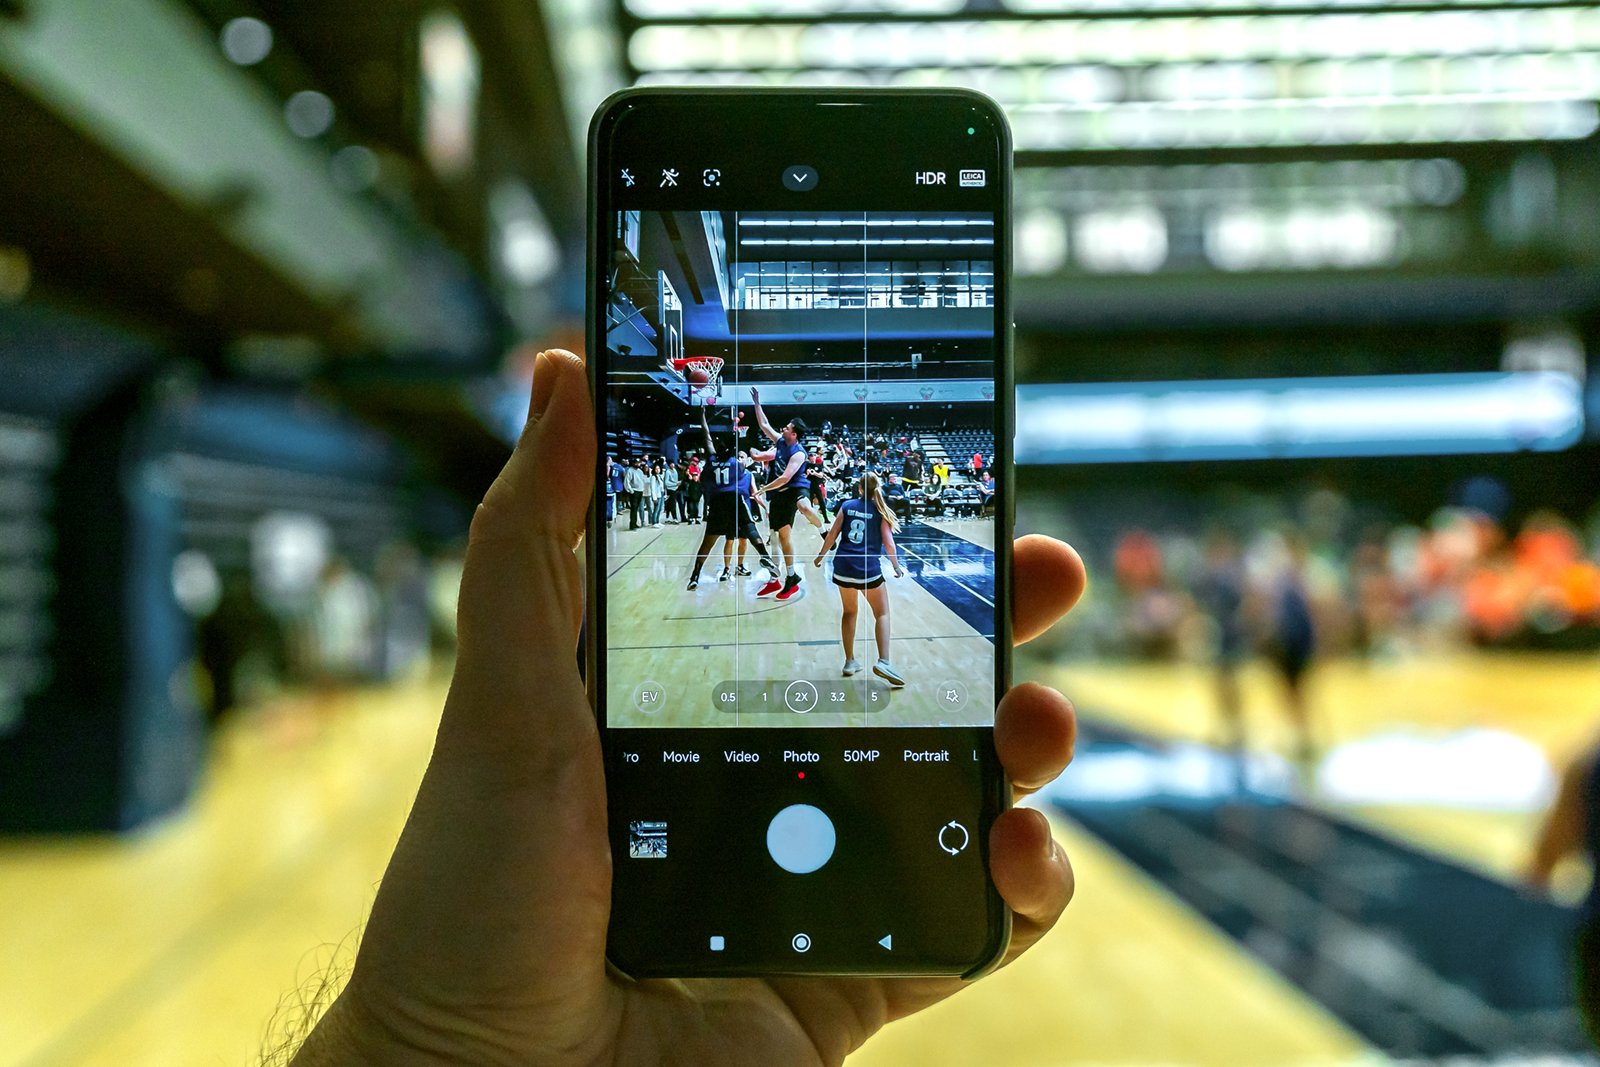 A hand holding a smartphone capturing a live basketball game, displayed on the screen with players in action and cheerleaders on the court.